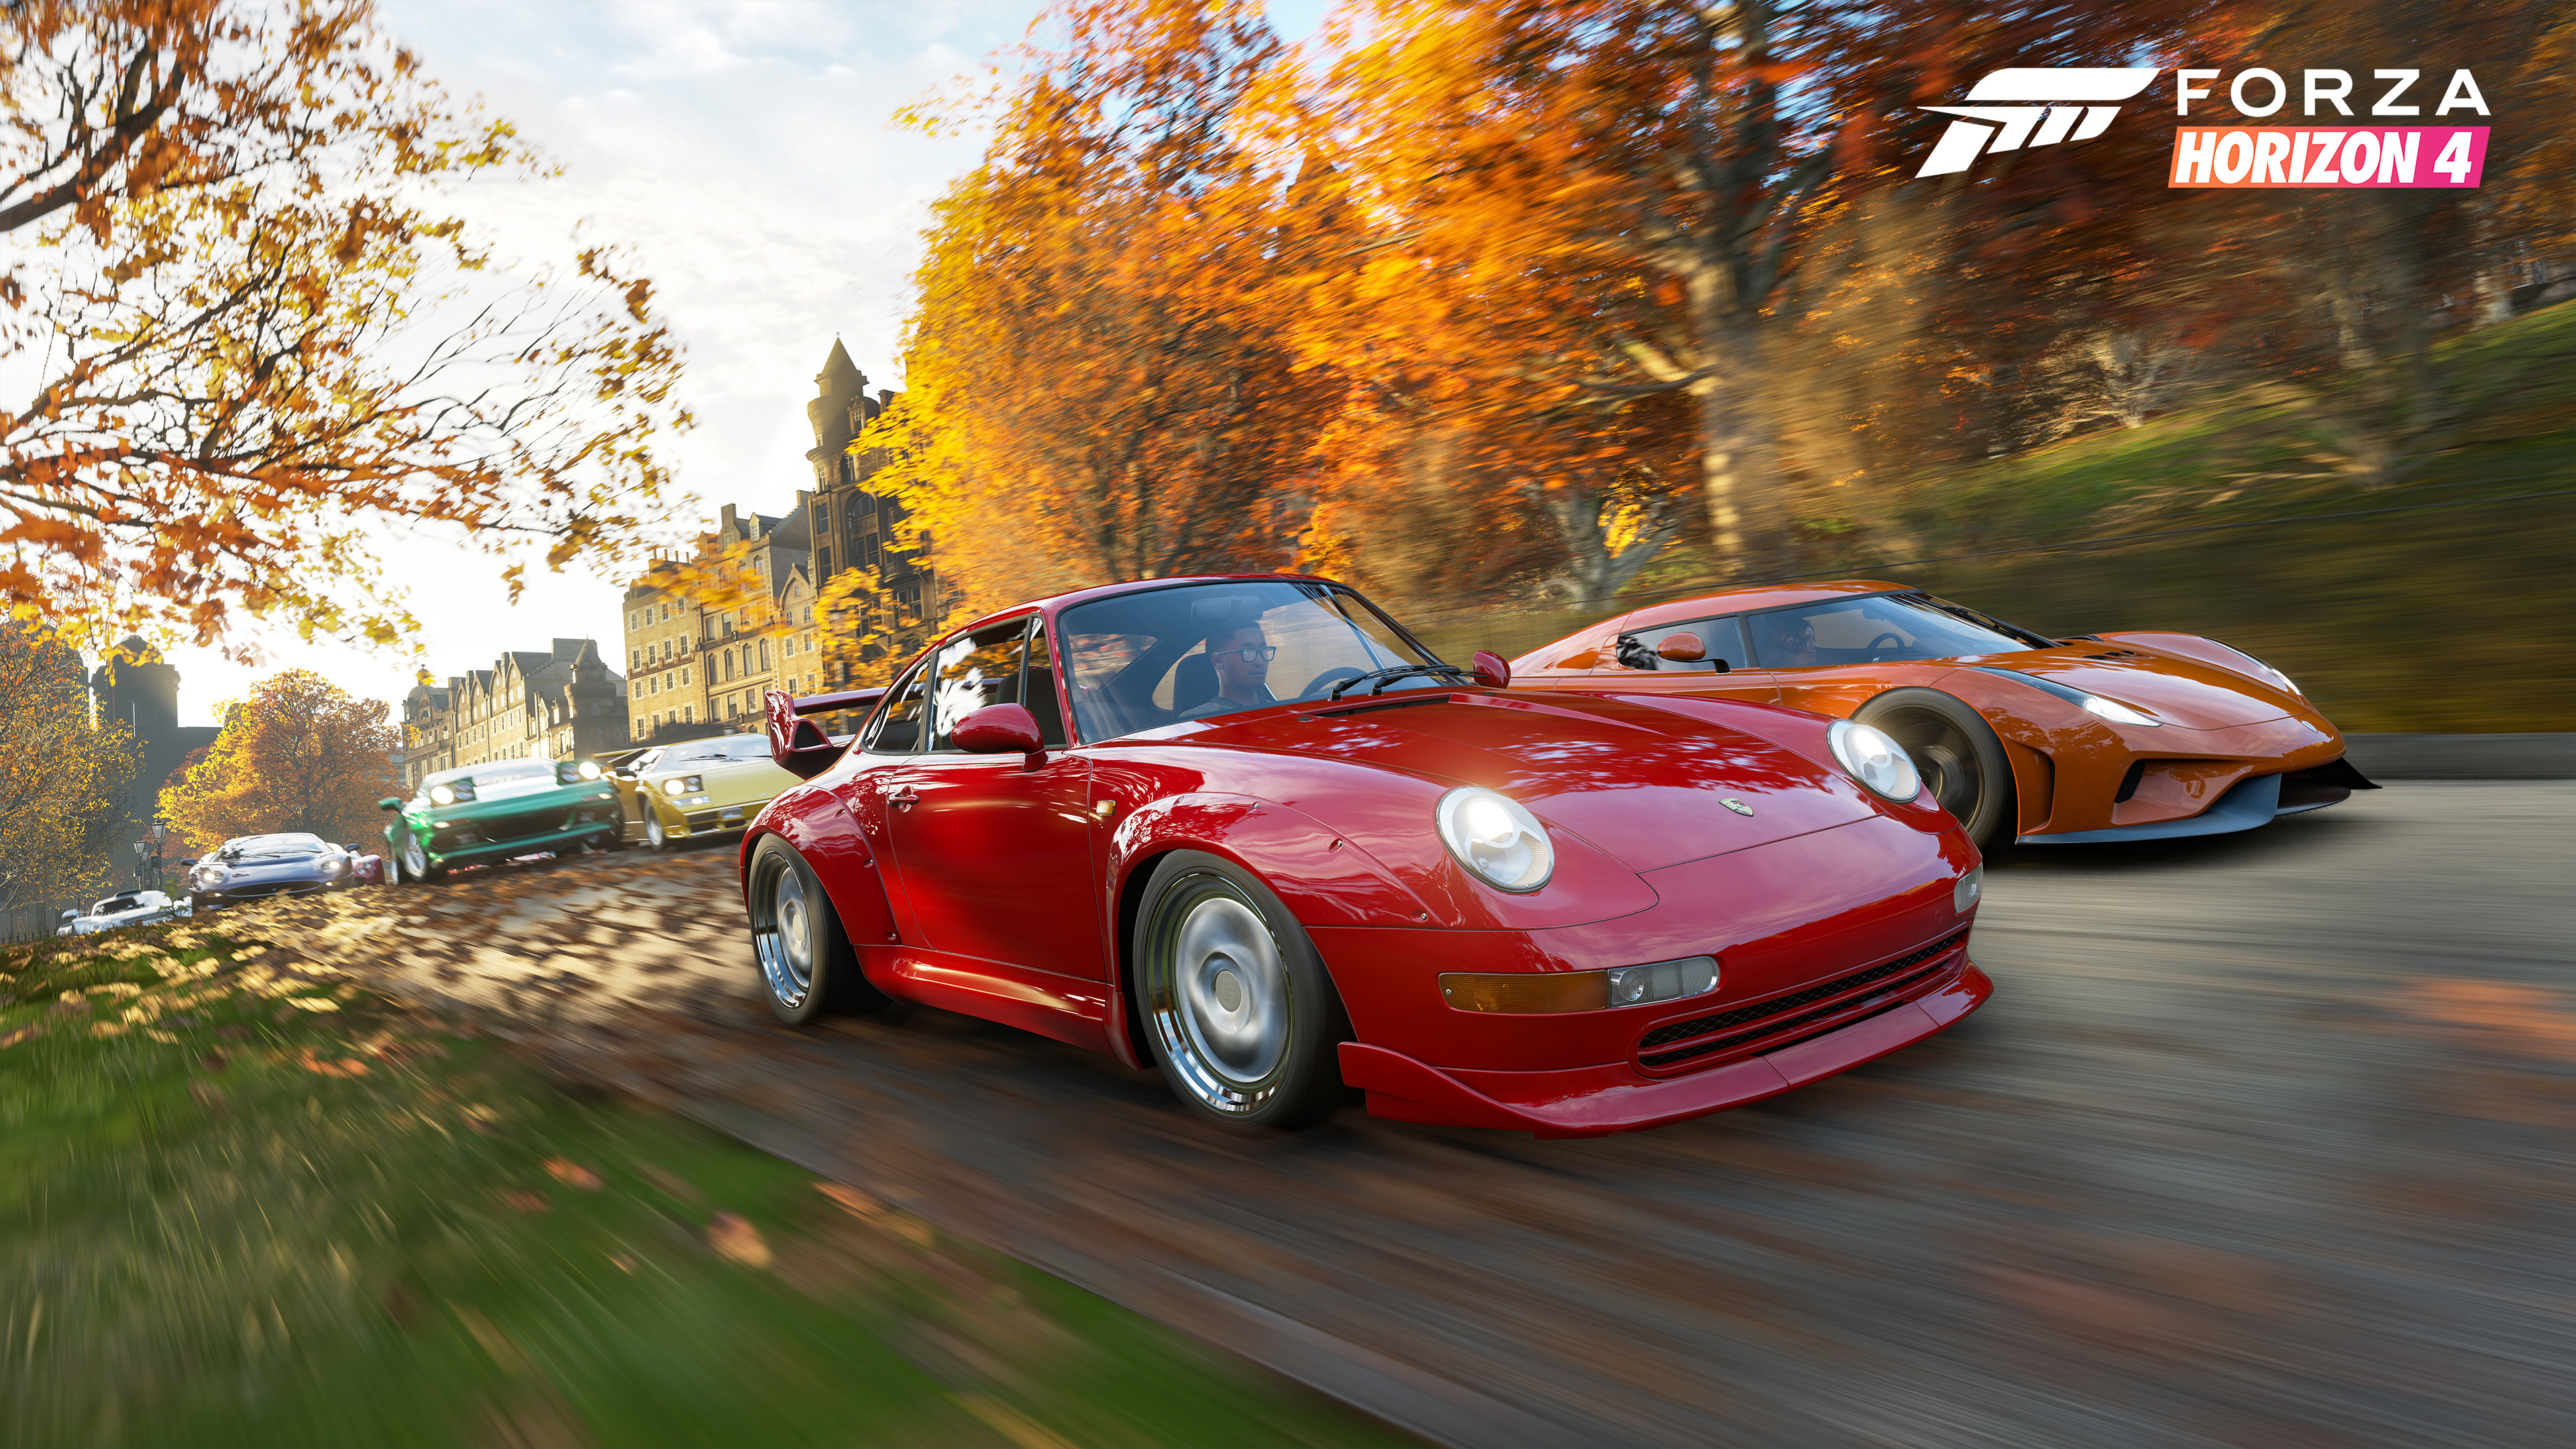 Forza Horizon 4 4k, HD Games, 4k Wallpapers, Images, Backgrounds